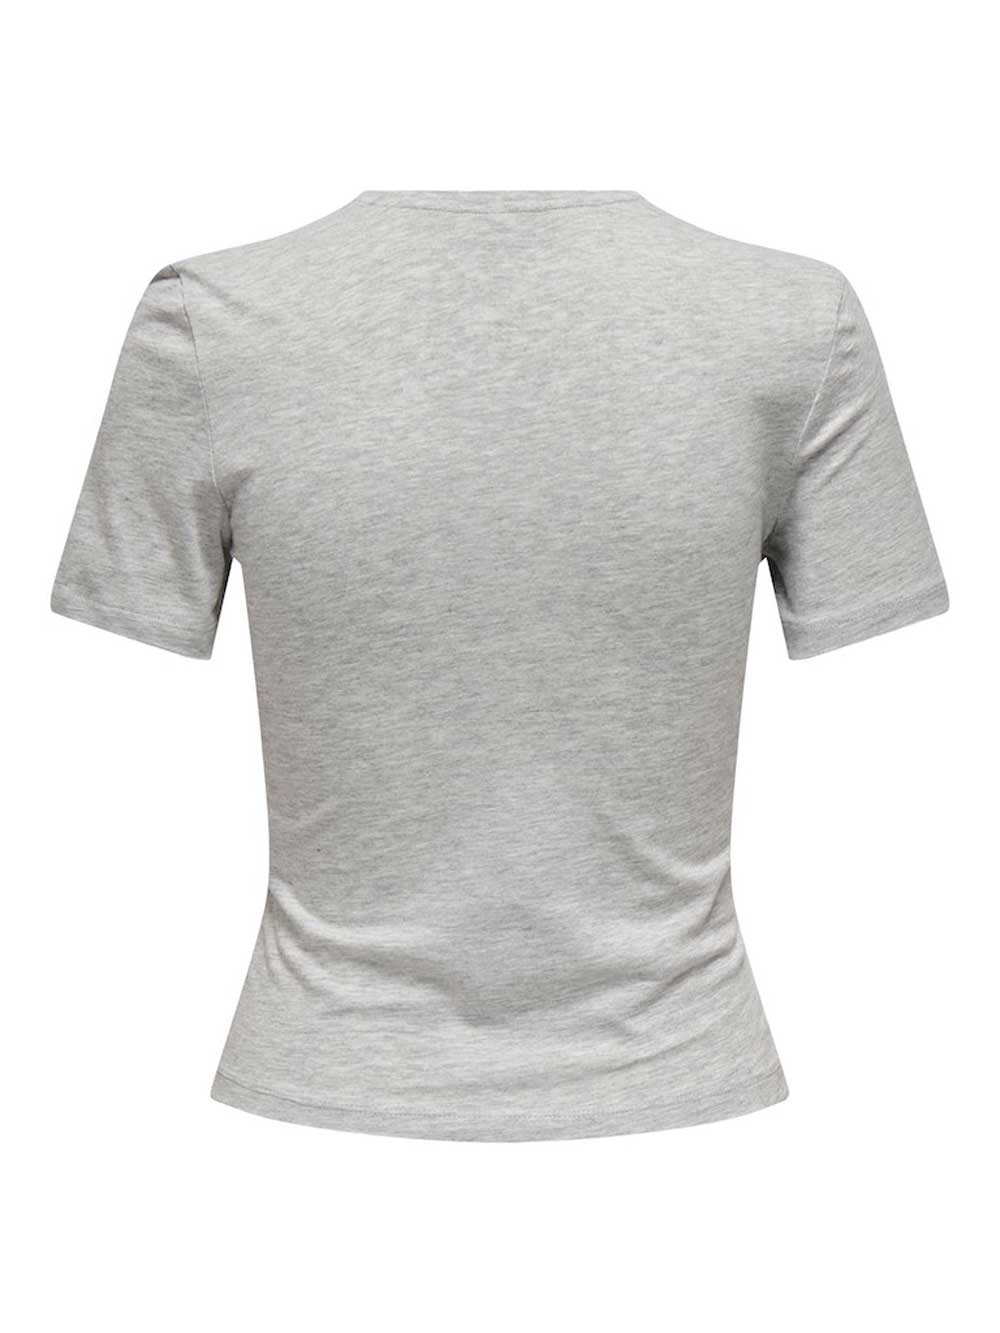 ONLY T-shirts e Tops ONLY da DONNA - grigio